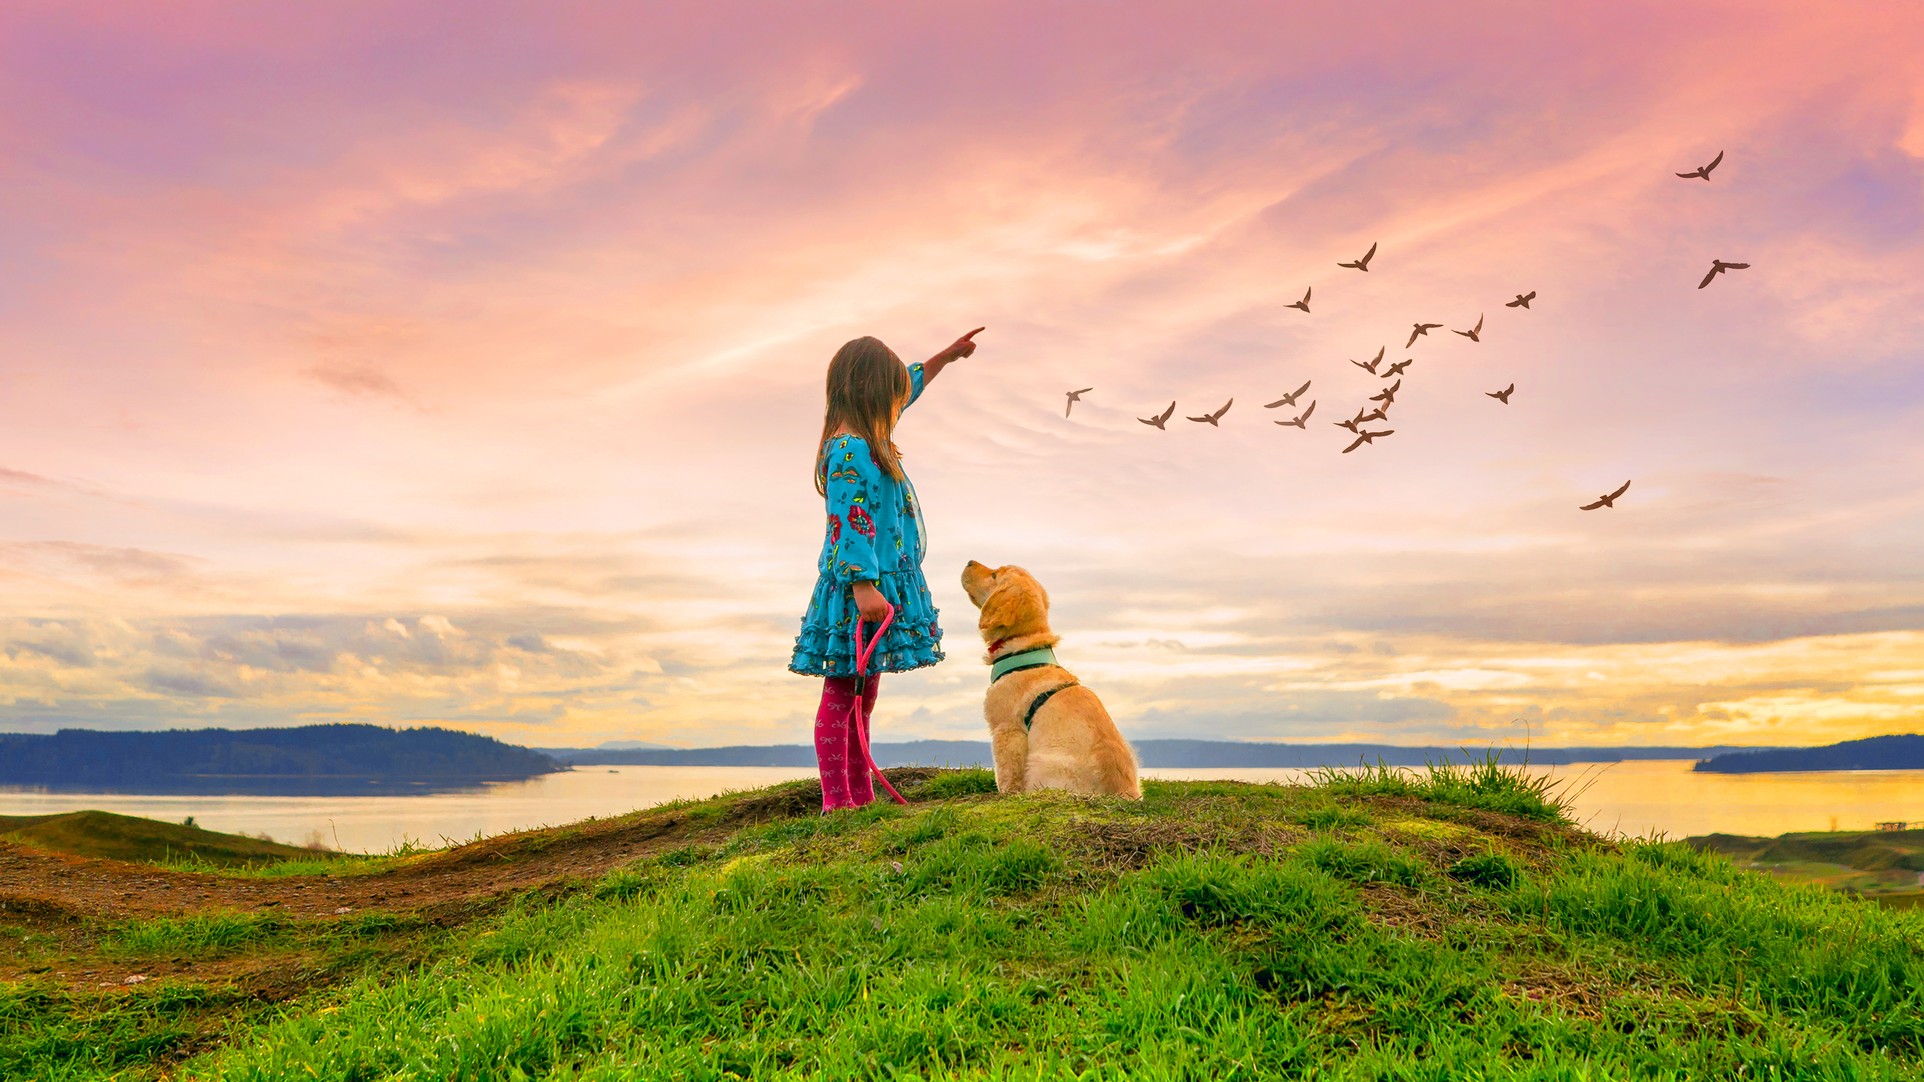 Design apps for Windows: Girl and dog on hill